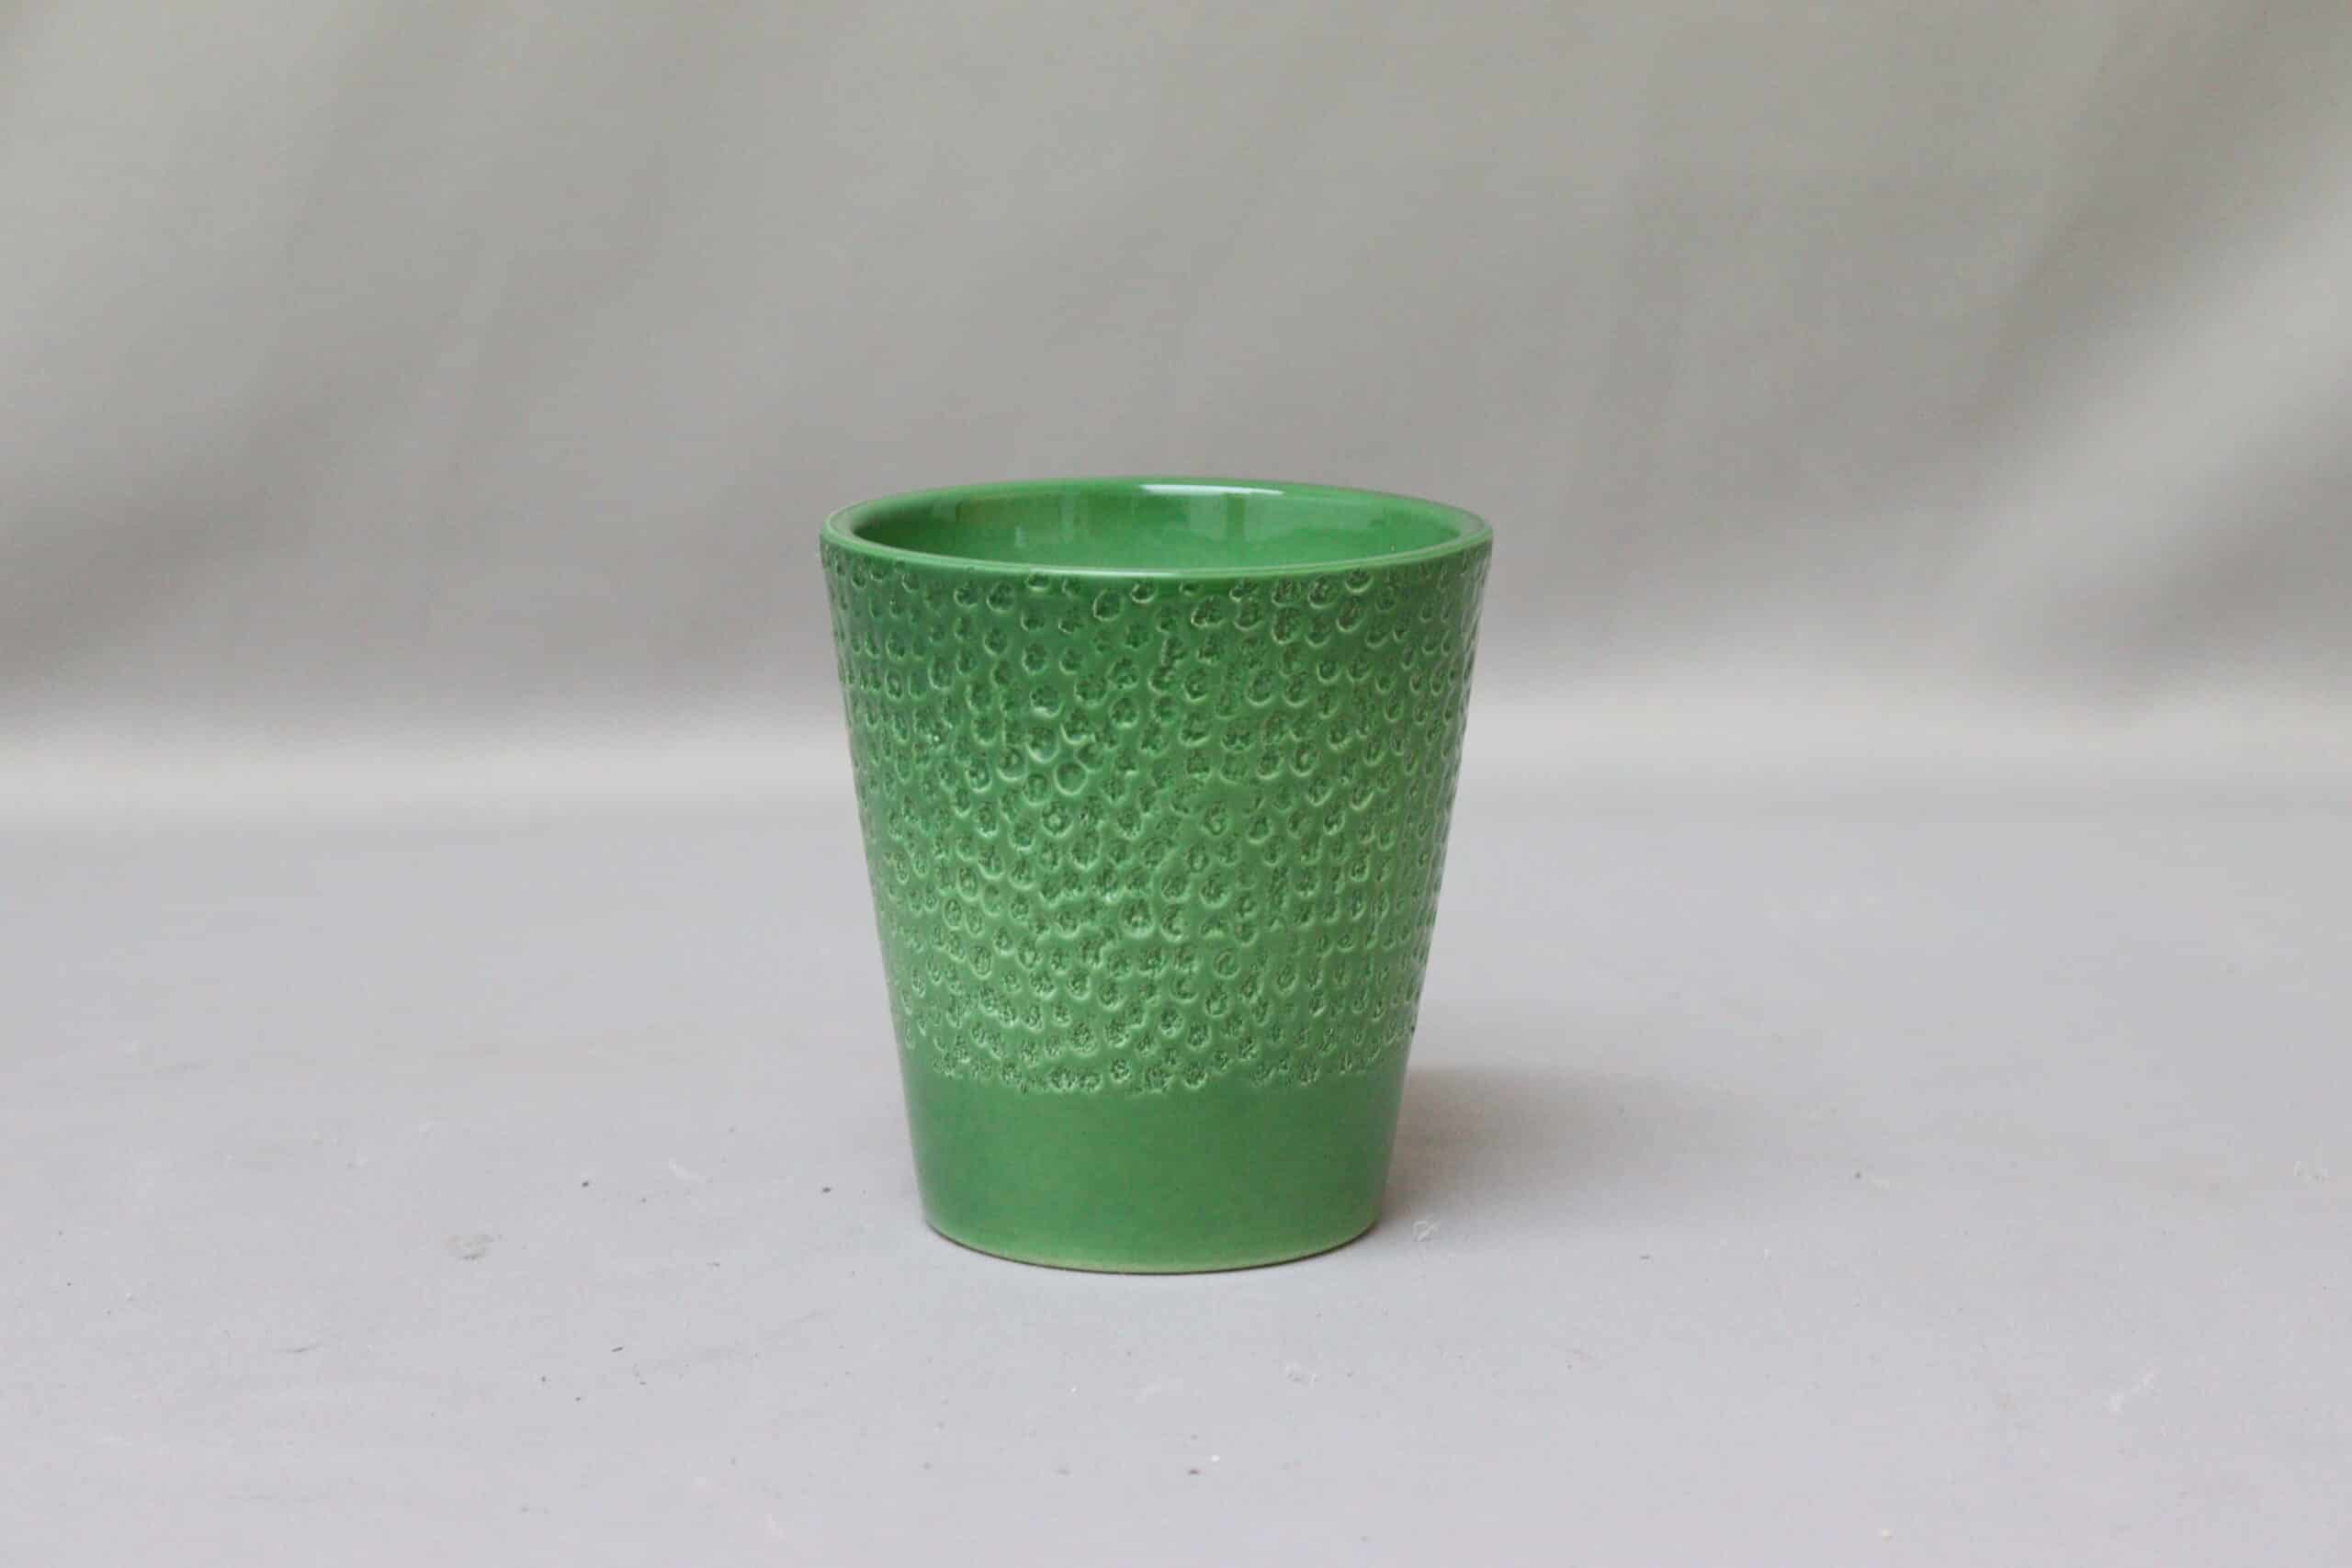 Textured bright green pot cover for potted plants.